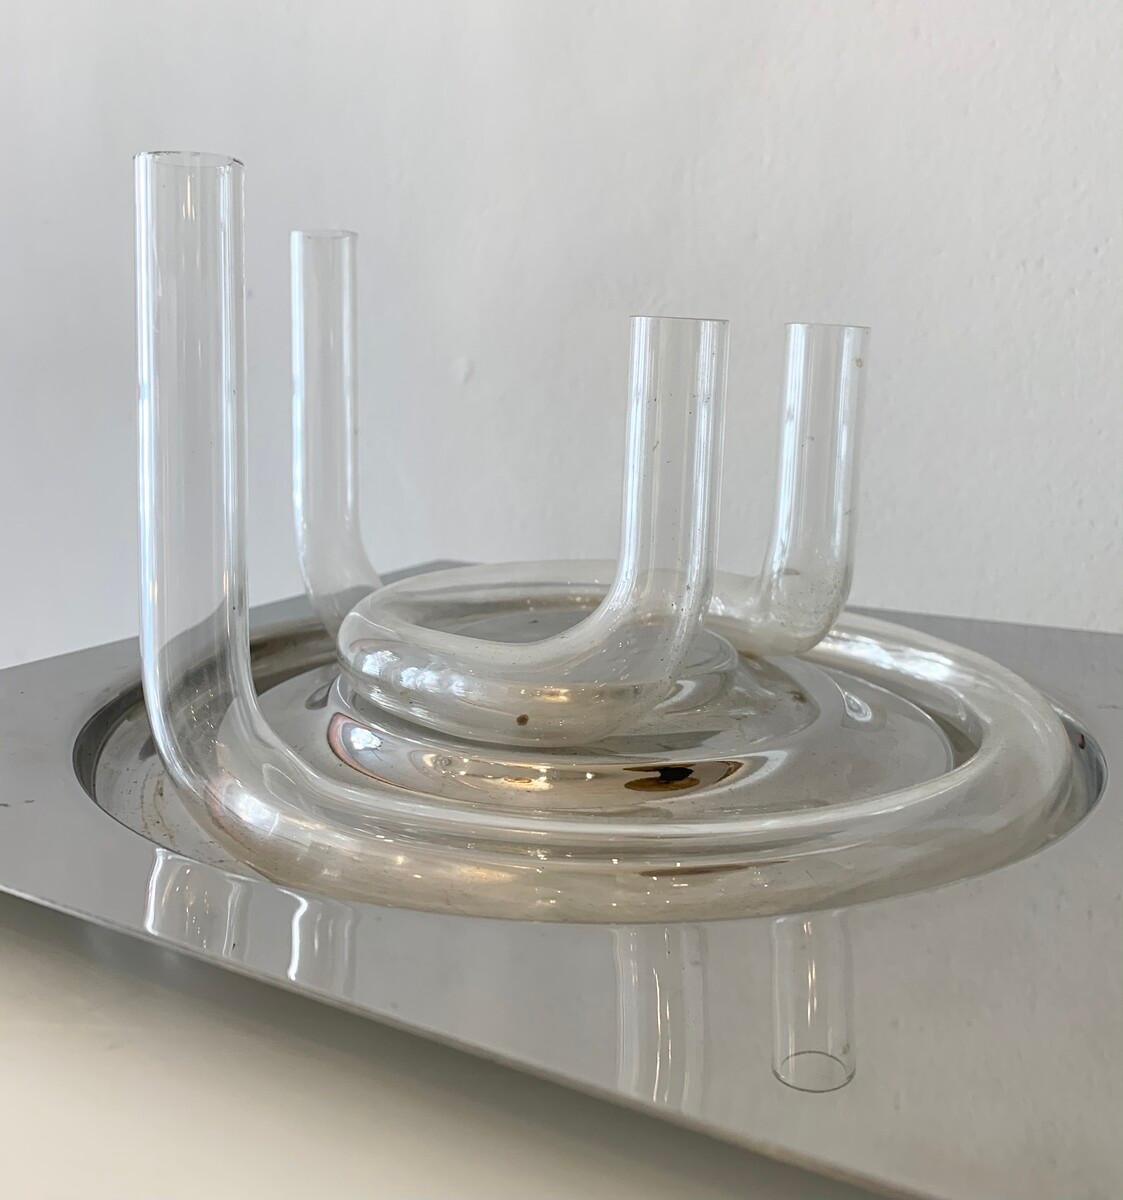 Glass and Metal Soliflore by Jean Keup for Op der Millen, Belgium, 1970s In Good Condition For Sale In Brussels, BE